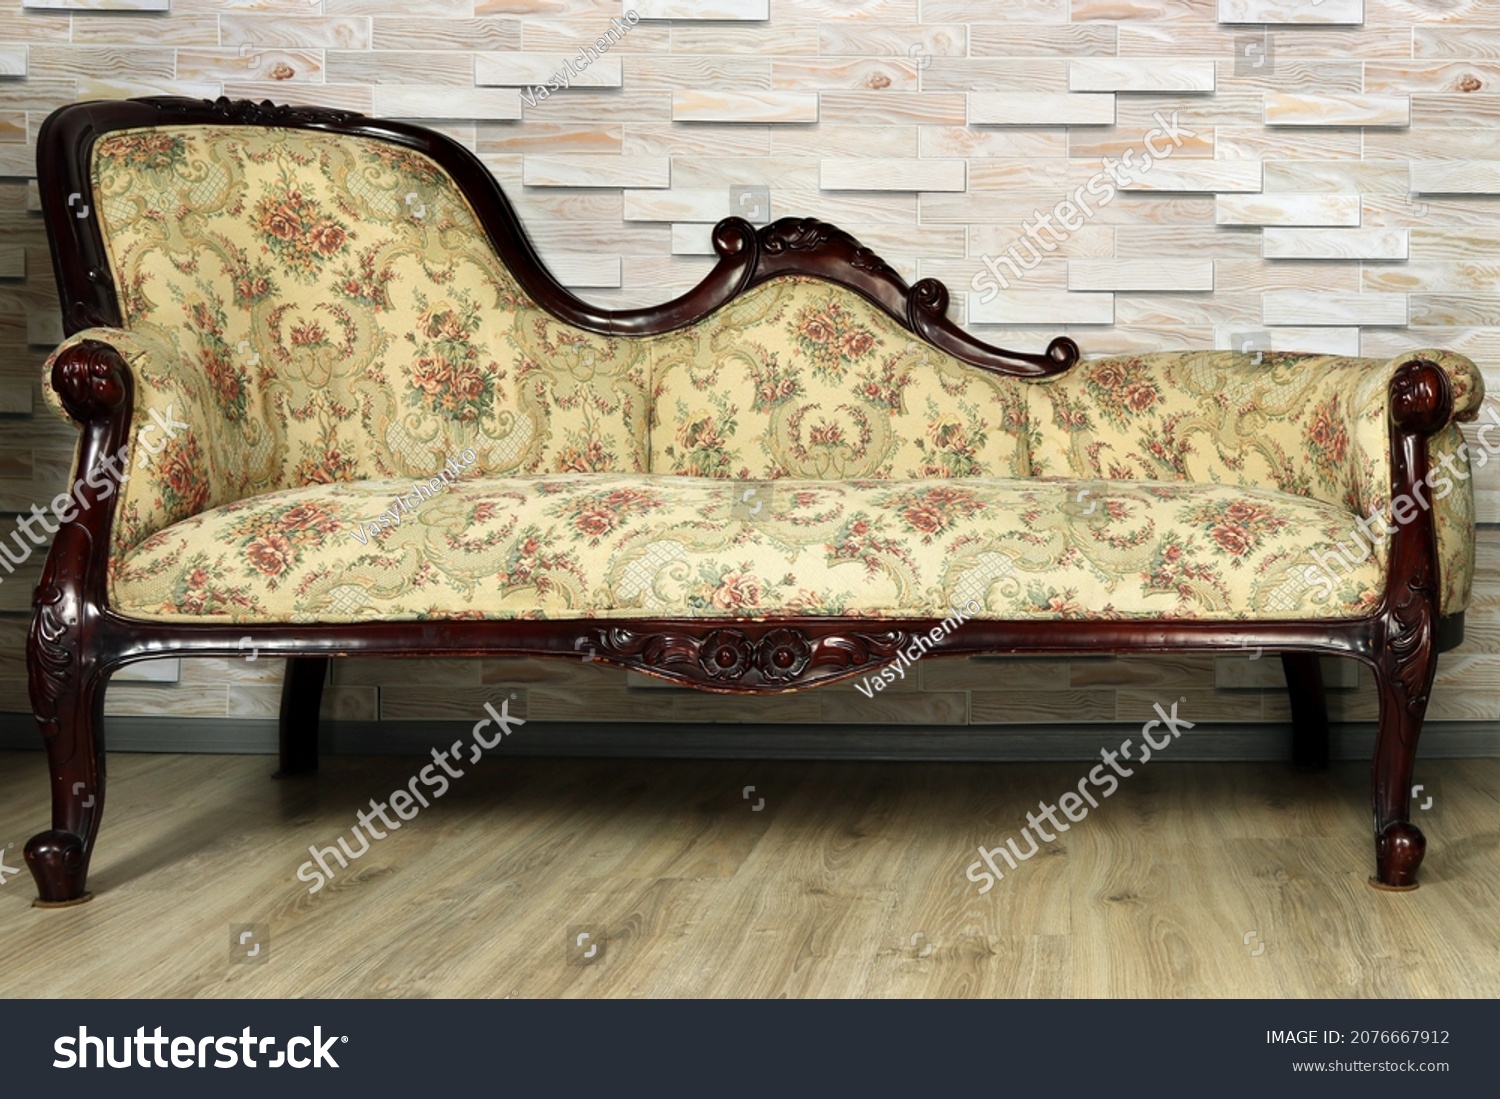 Antique furniture close-up. Sofa banquette in baroque style against the background of a wooden wall. #2076667912